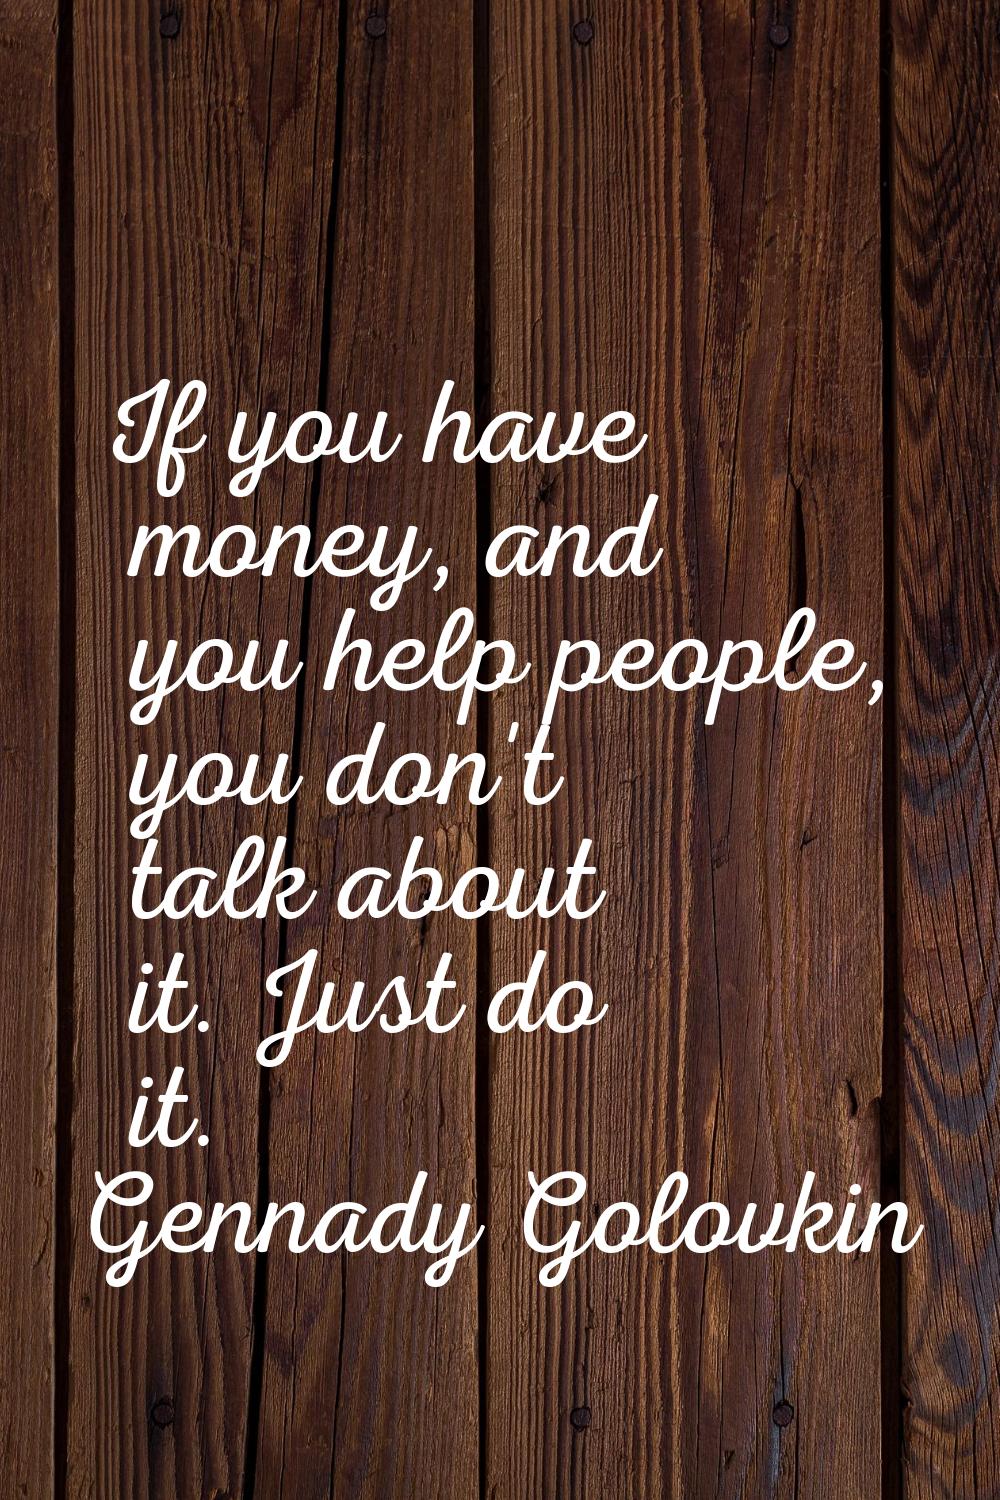 If you have money, and you help people, you don't talk about it. Just do it.